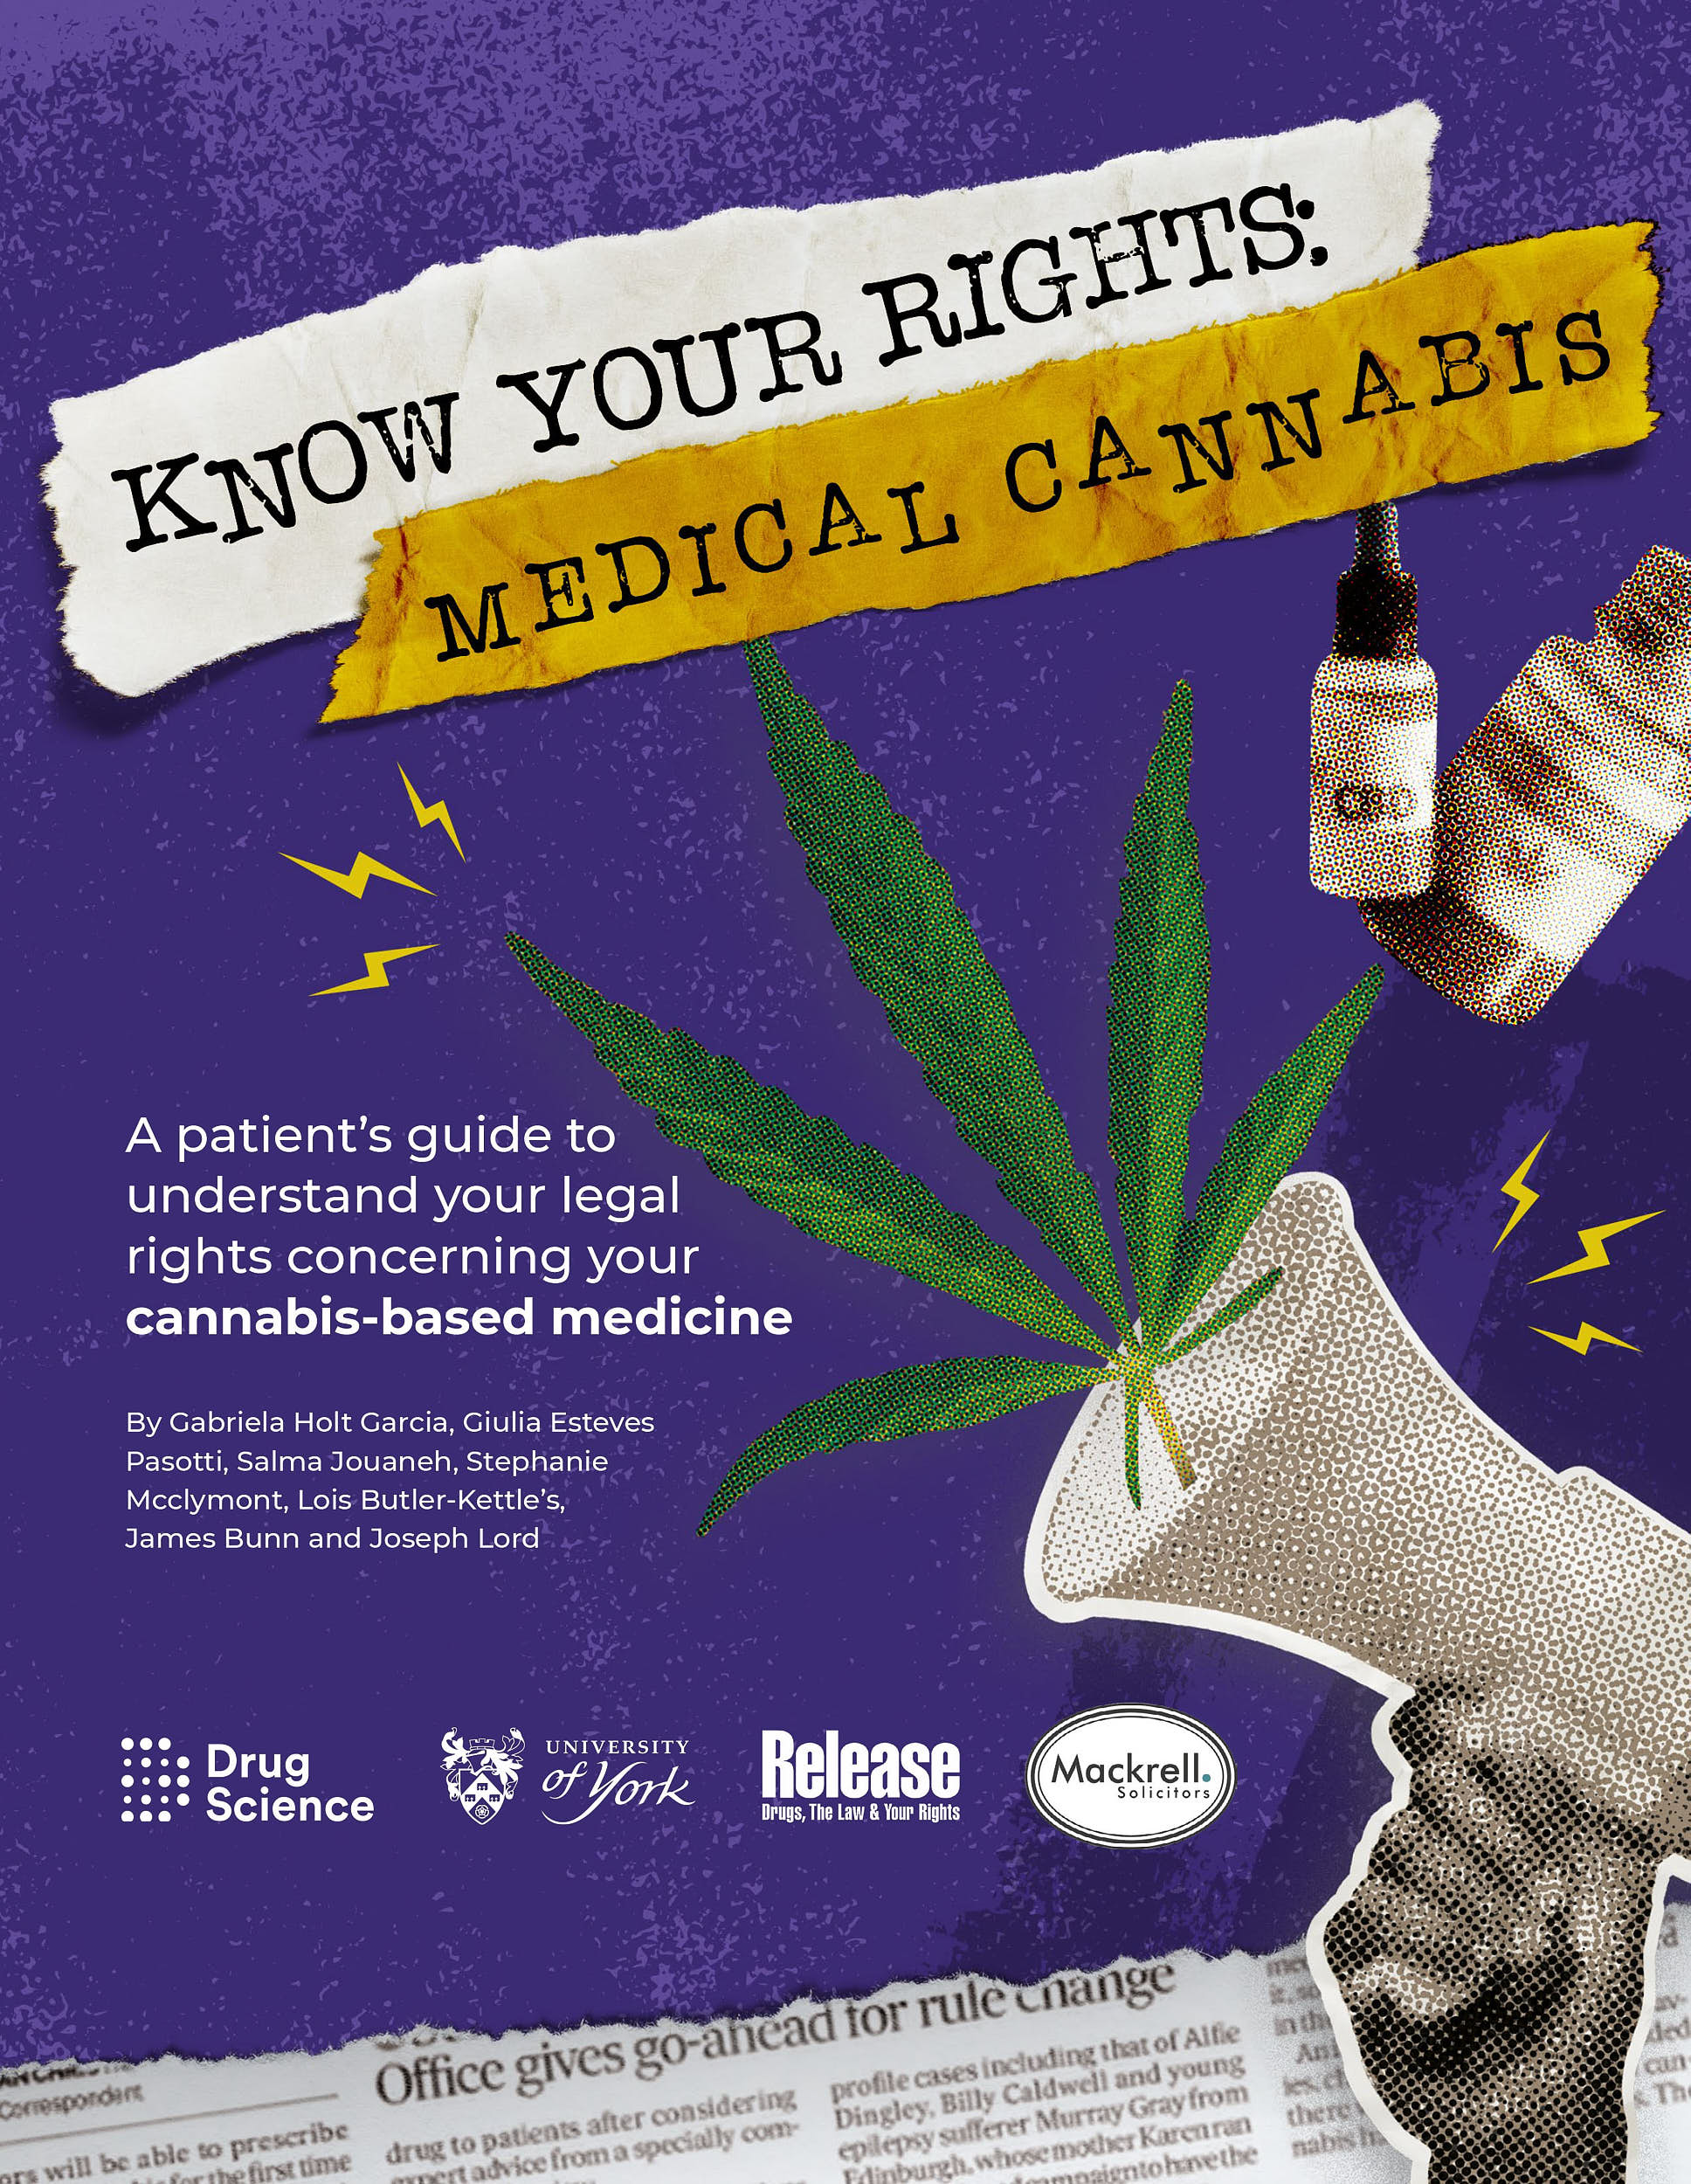 The cover image for an article; showing the article name 'Know Your Rights: Medical Cannabis' with a photo of a loudspeaker emitting a cannabis plant.